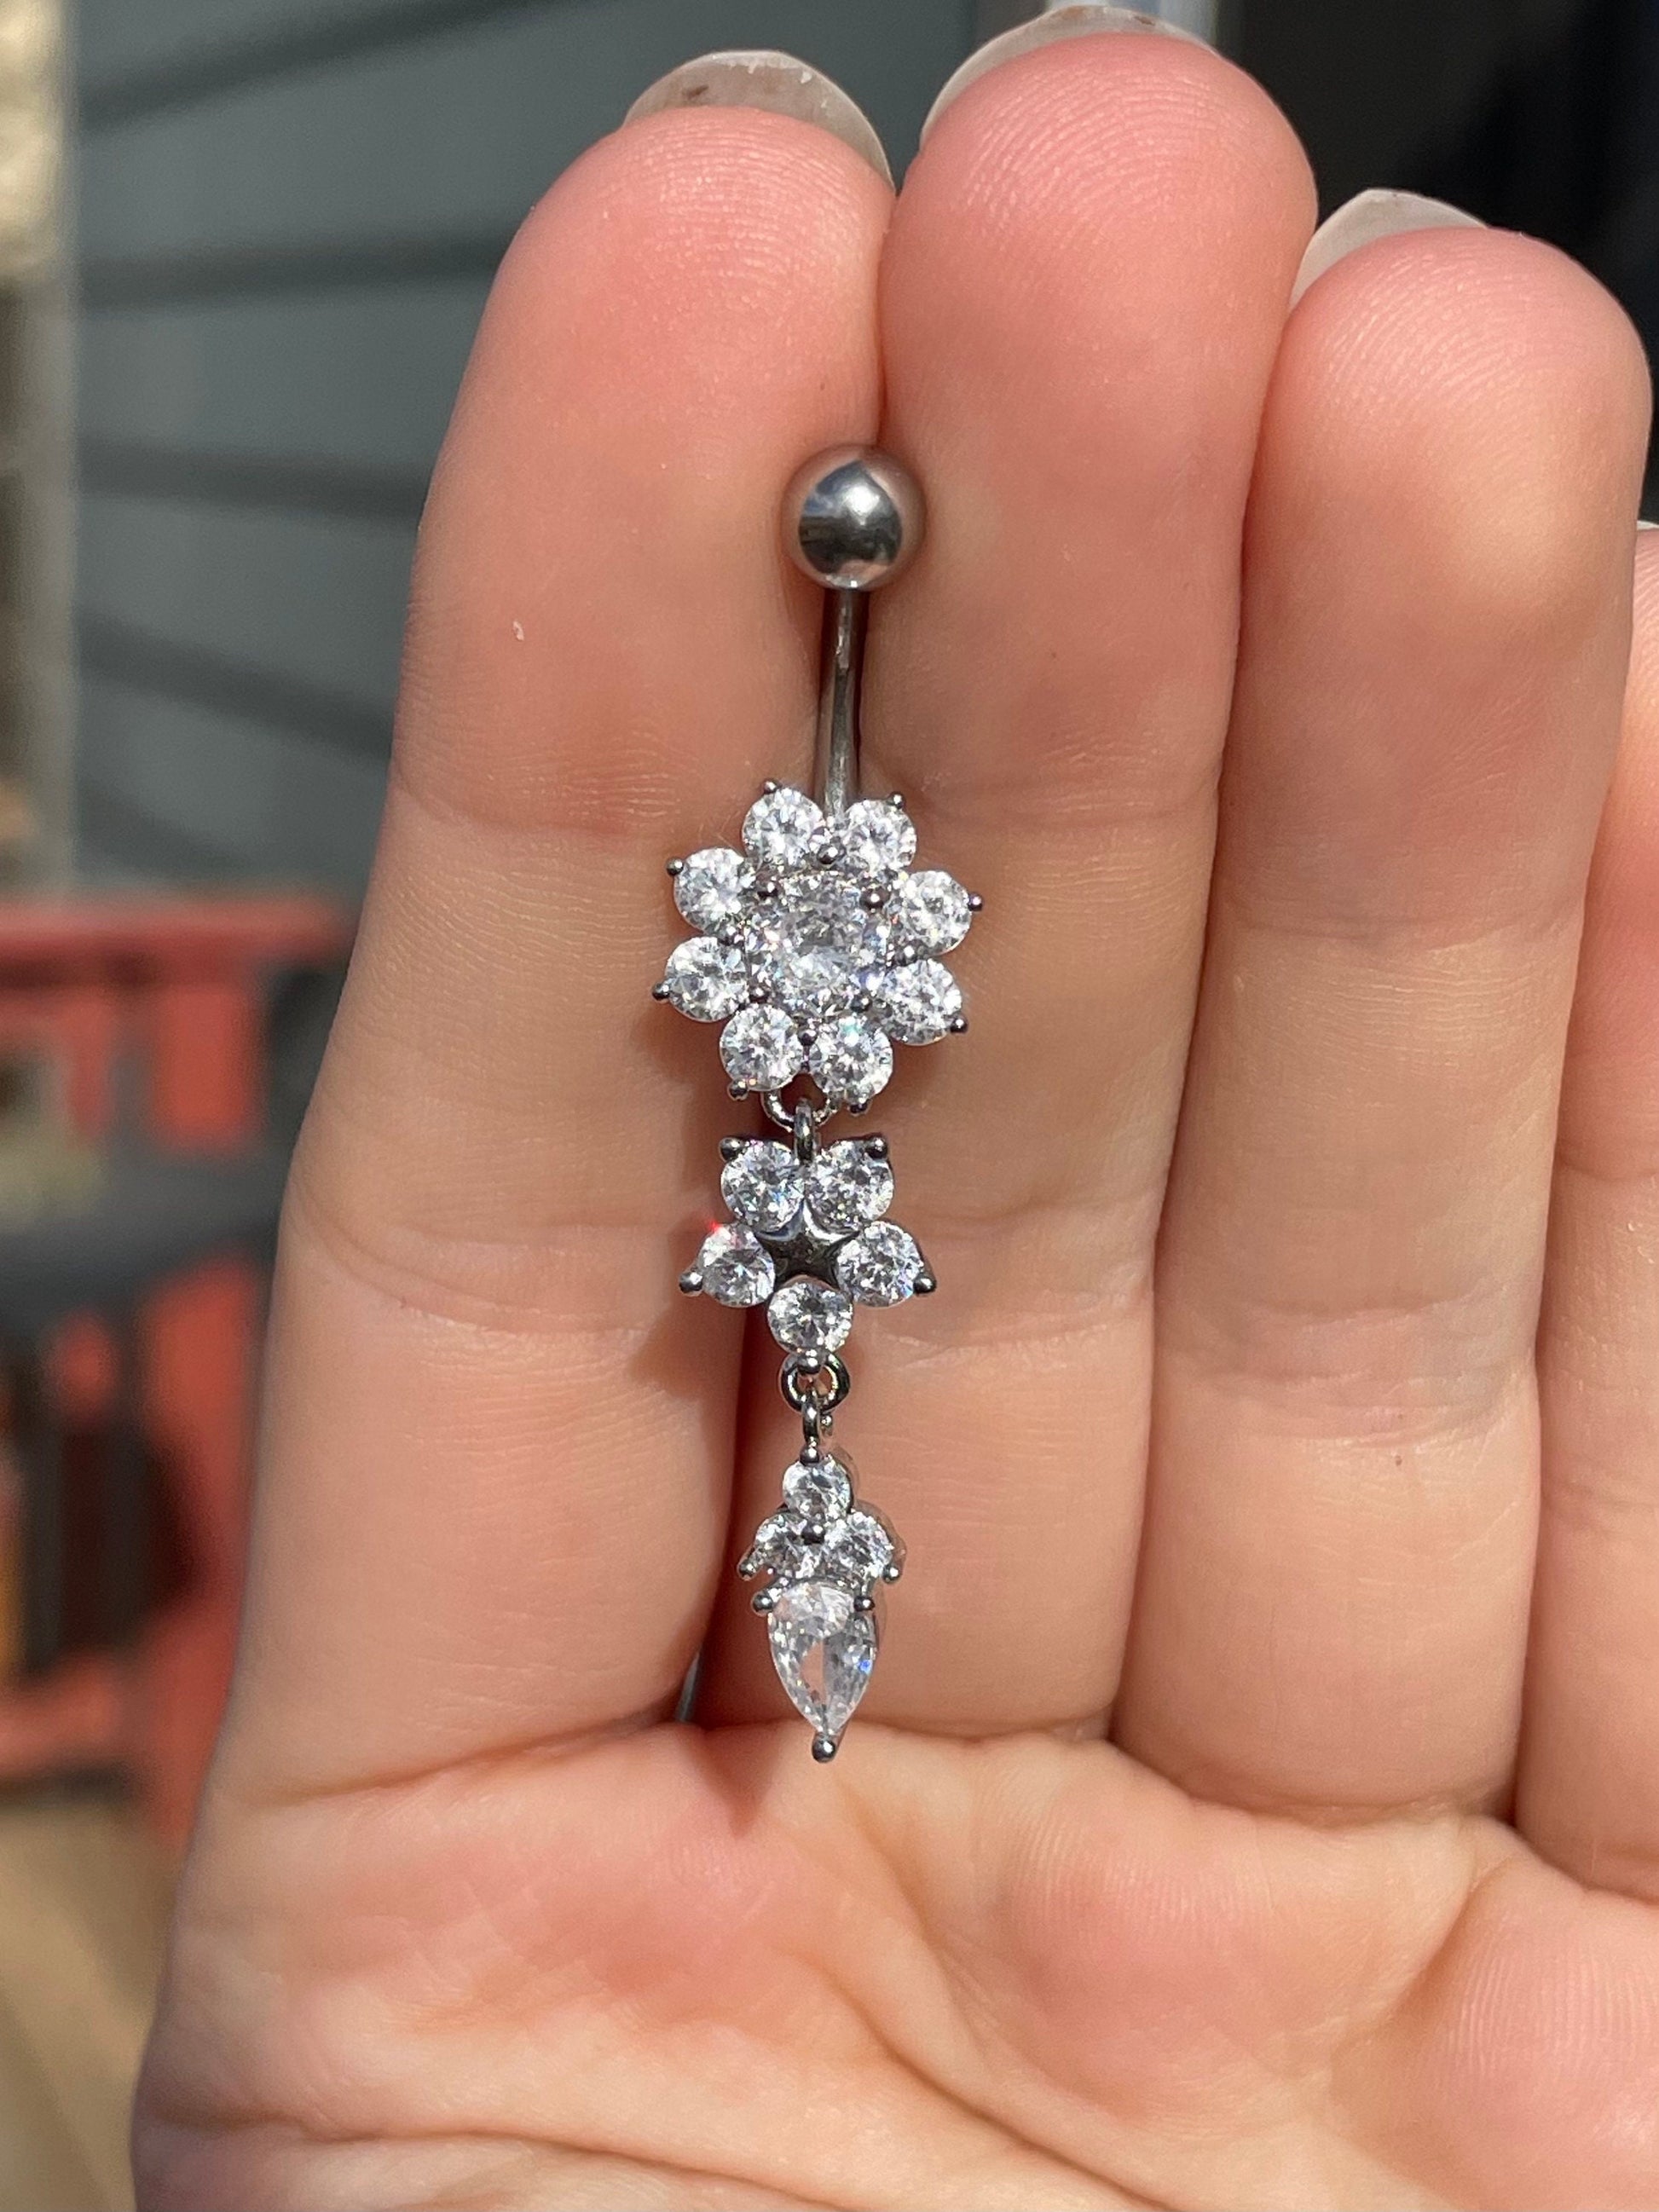 Dangly Silver Flower Belly Button Ring (14G | 10mm | Surgical Steel | Gold or Silver)